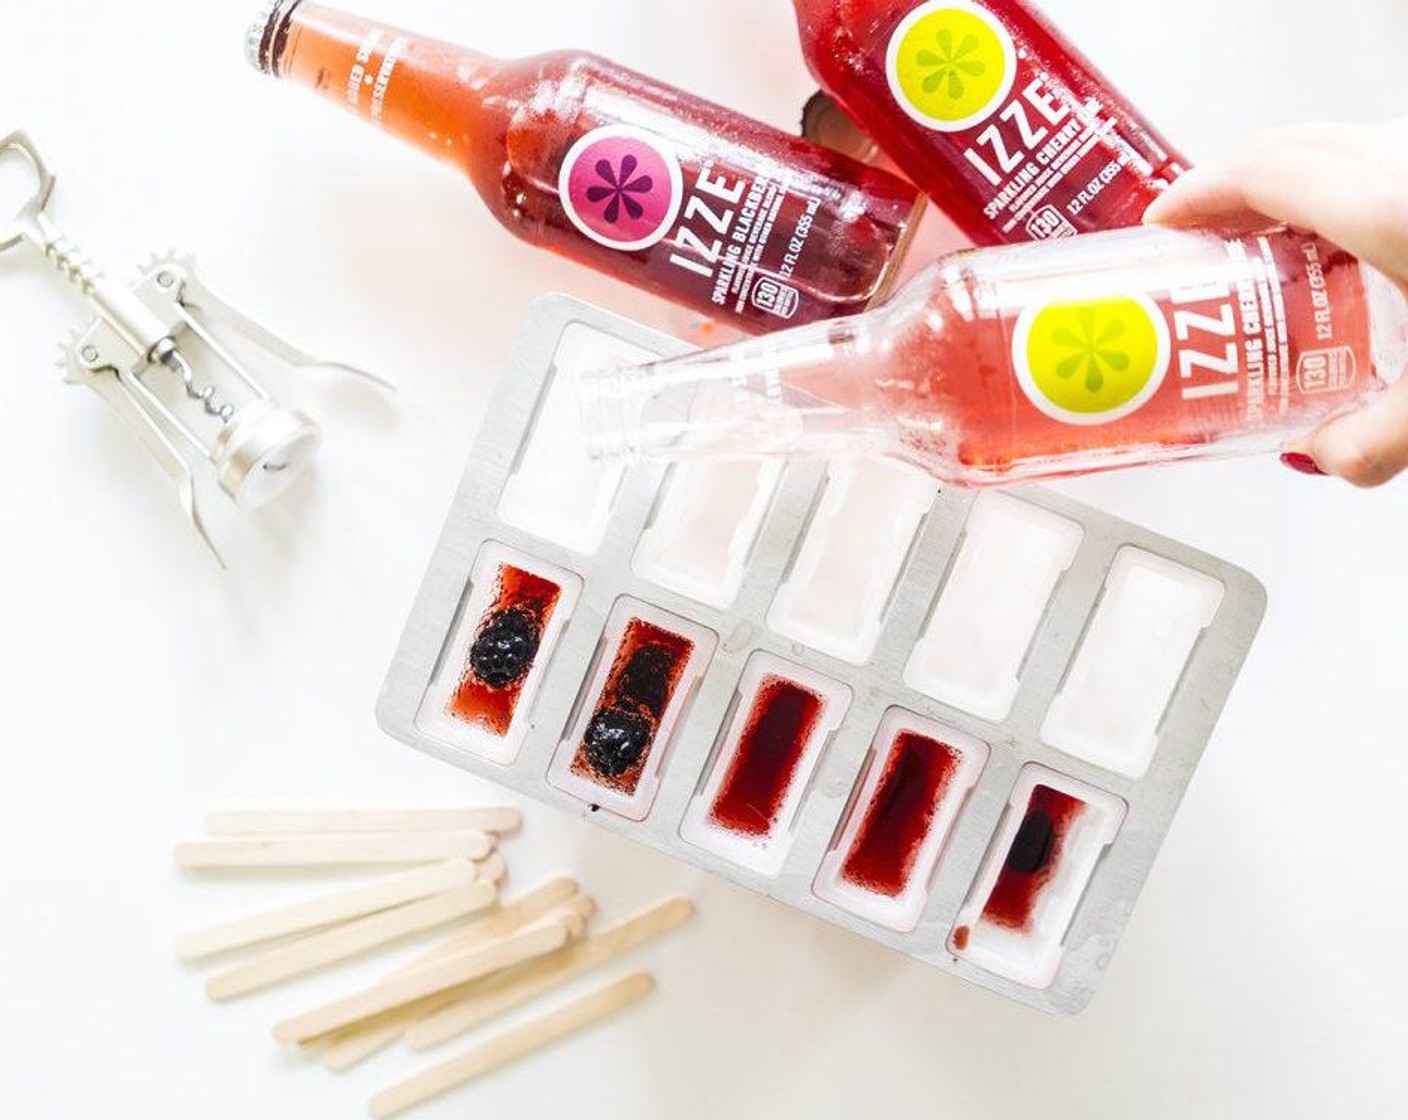 step 1 Fill your ice pop molds with IZZE® Sparkling Juice Blackberry (12 fl oz) and IZZE® Sparkling Juice Cherry Lime (12 fl oz) in separate compartments. Pour about 60 percent into each mold, because the liquid is going to expand as it freezes.